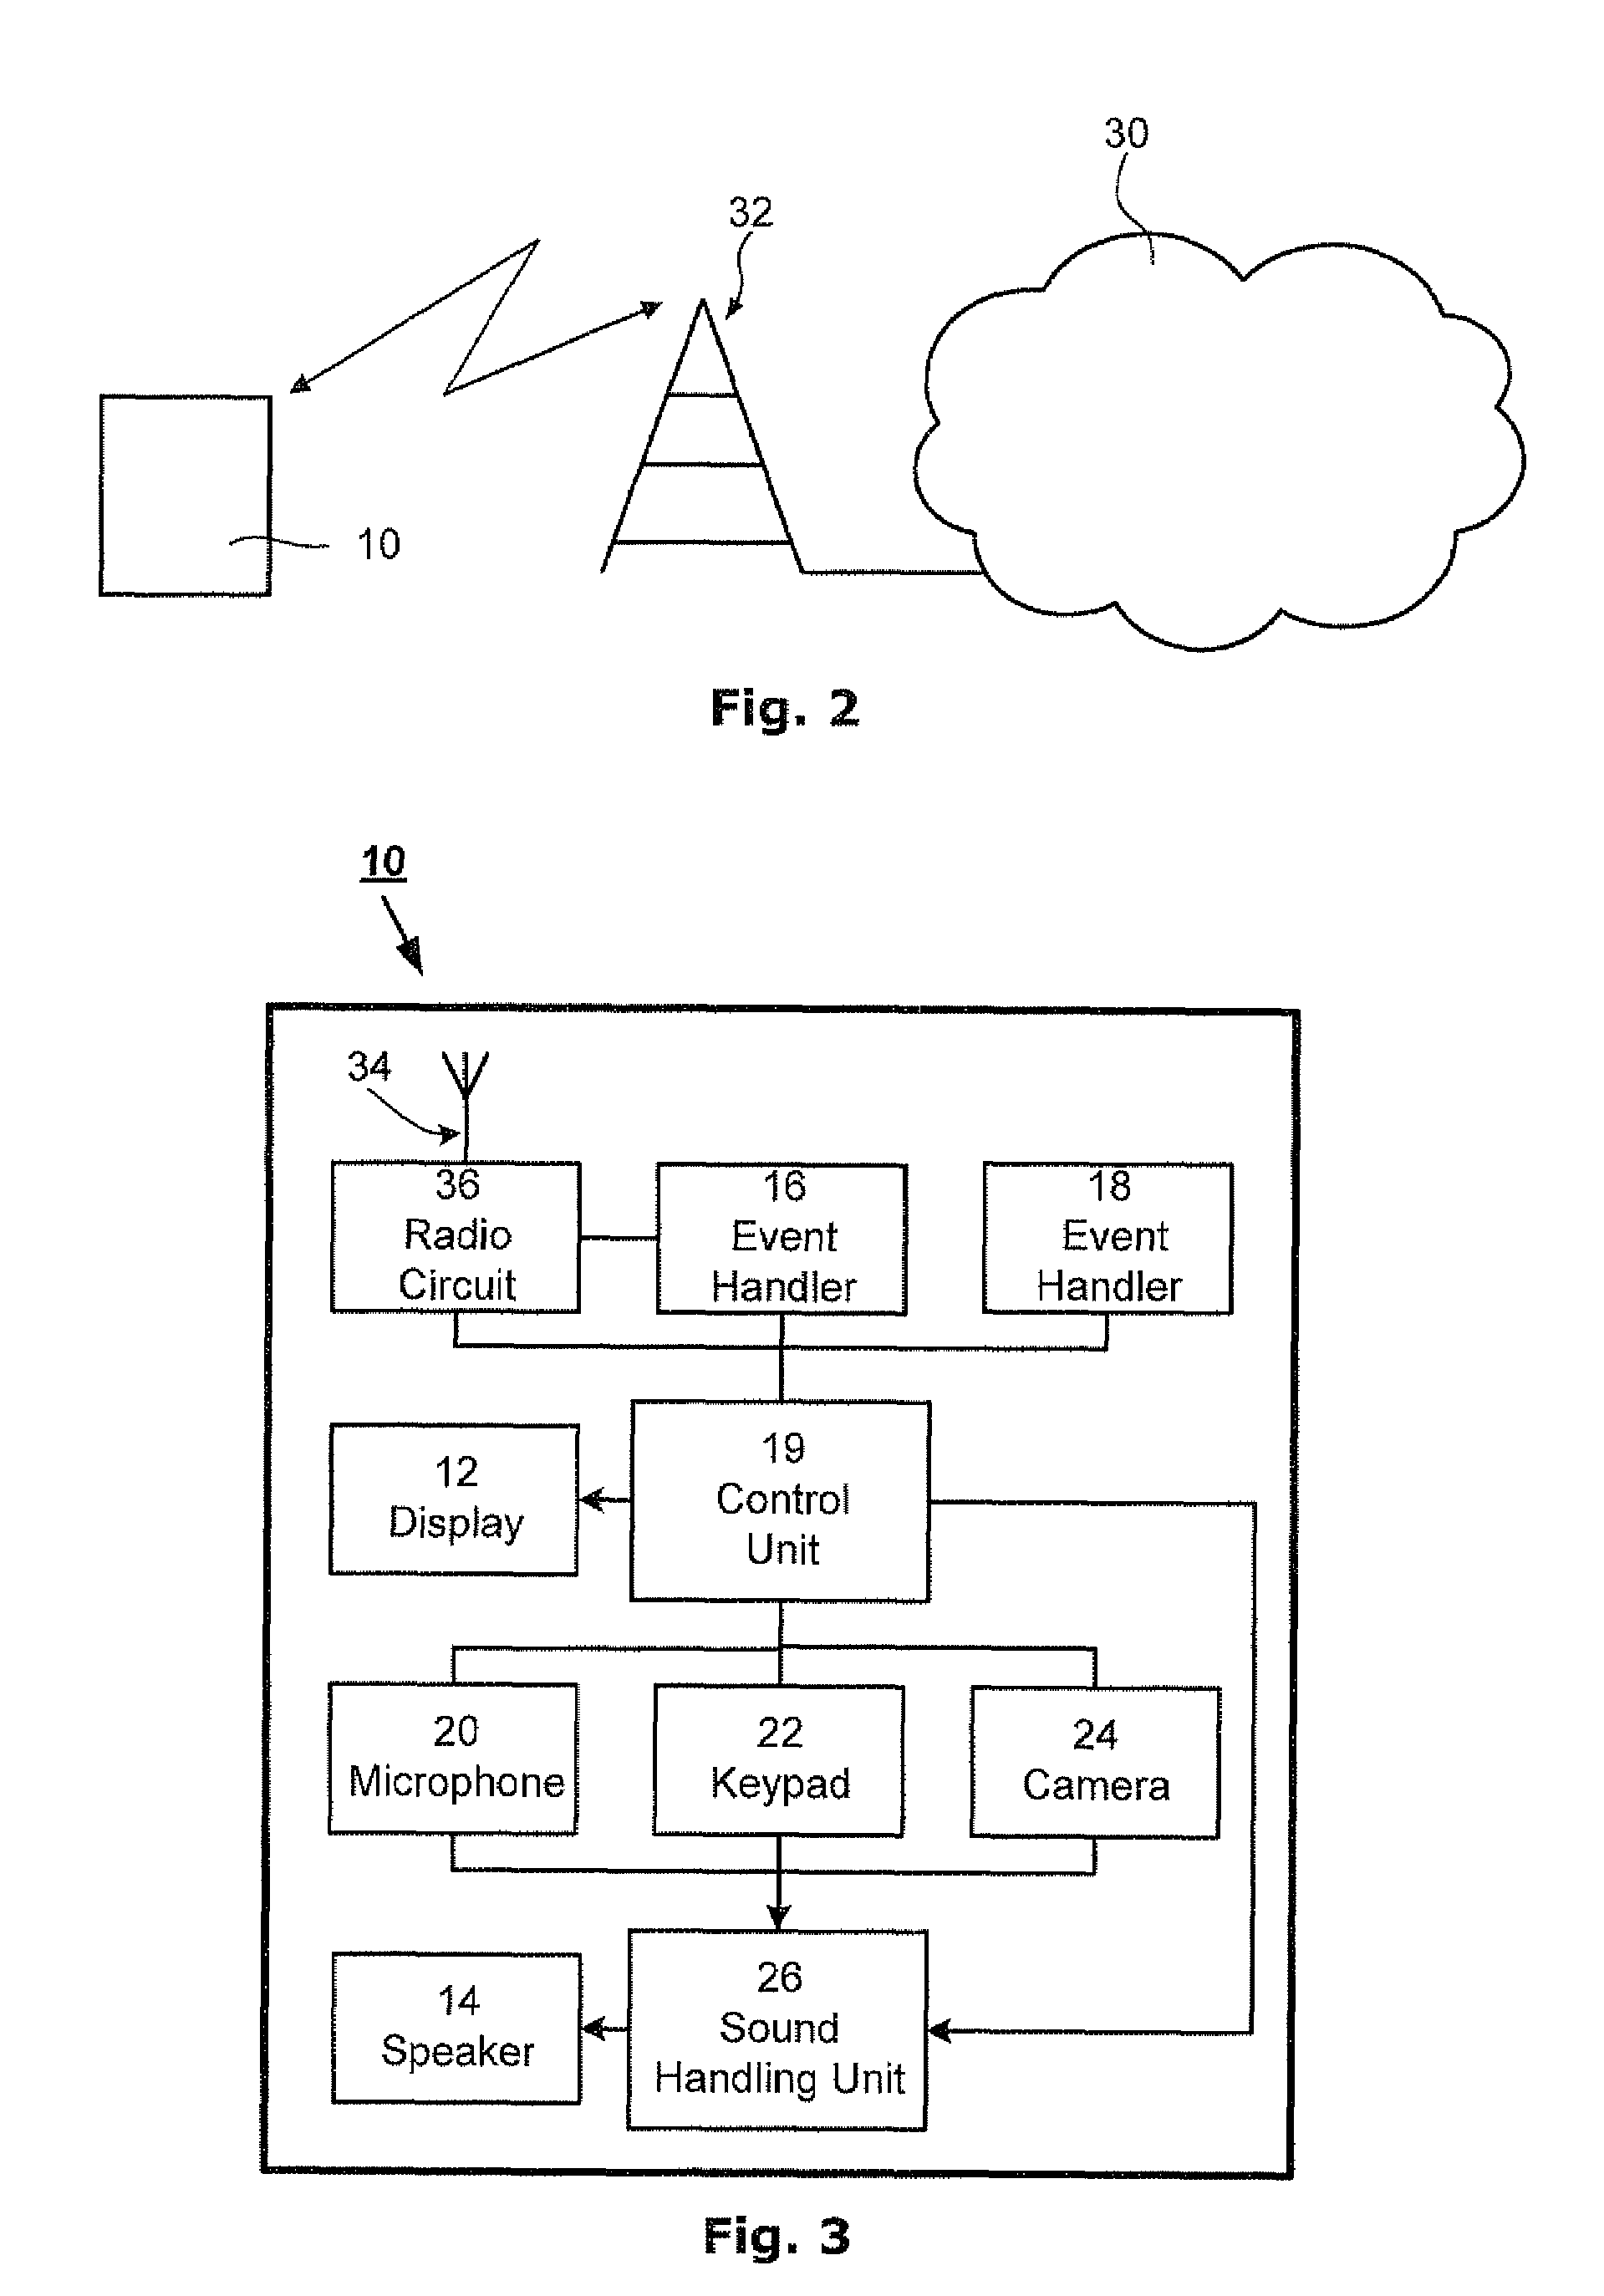 Adaptive audio signals in portable communications devices